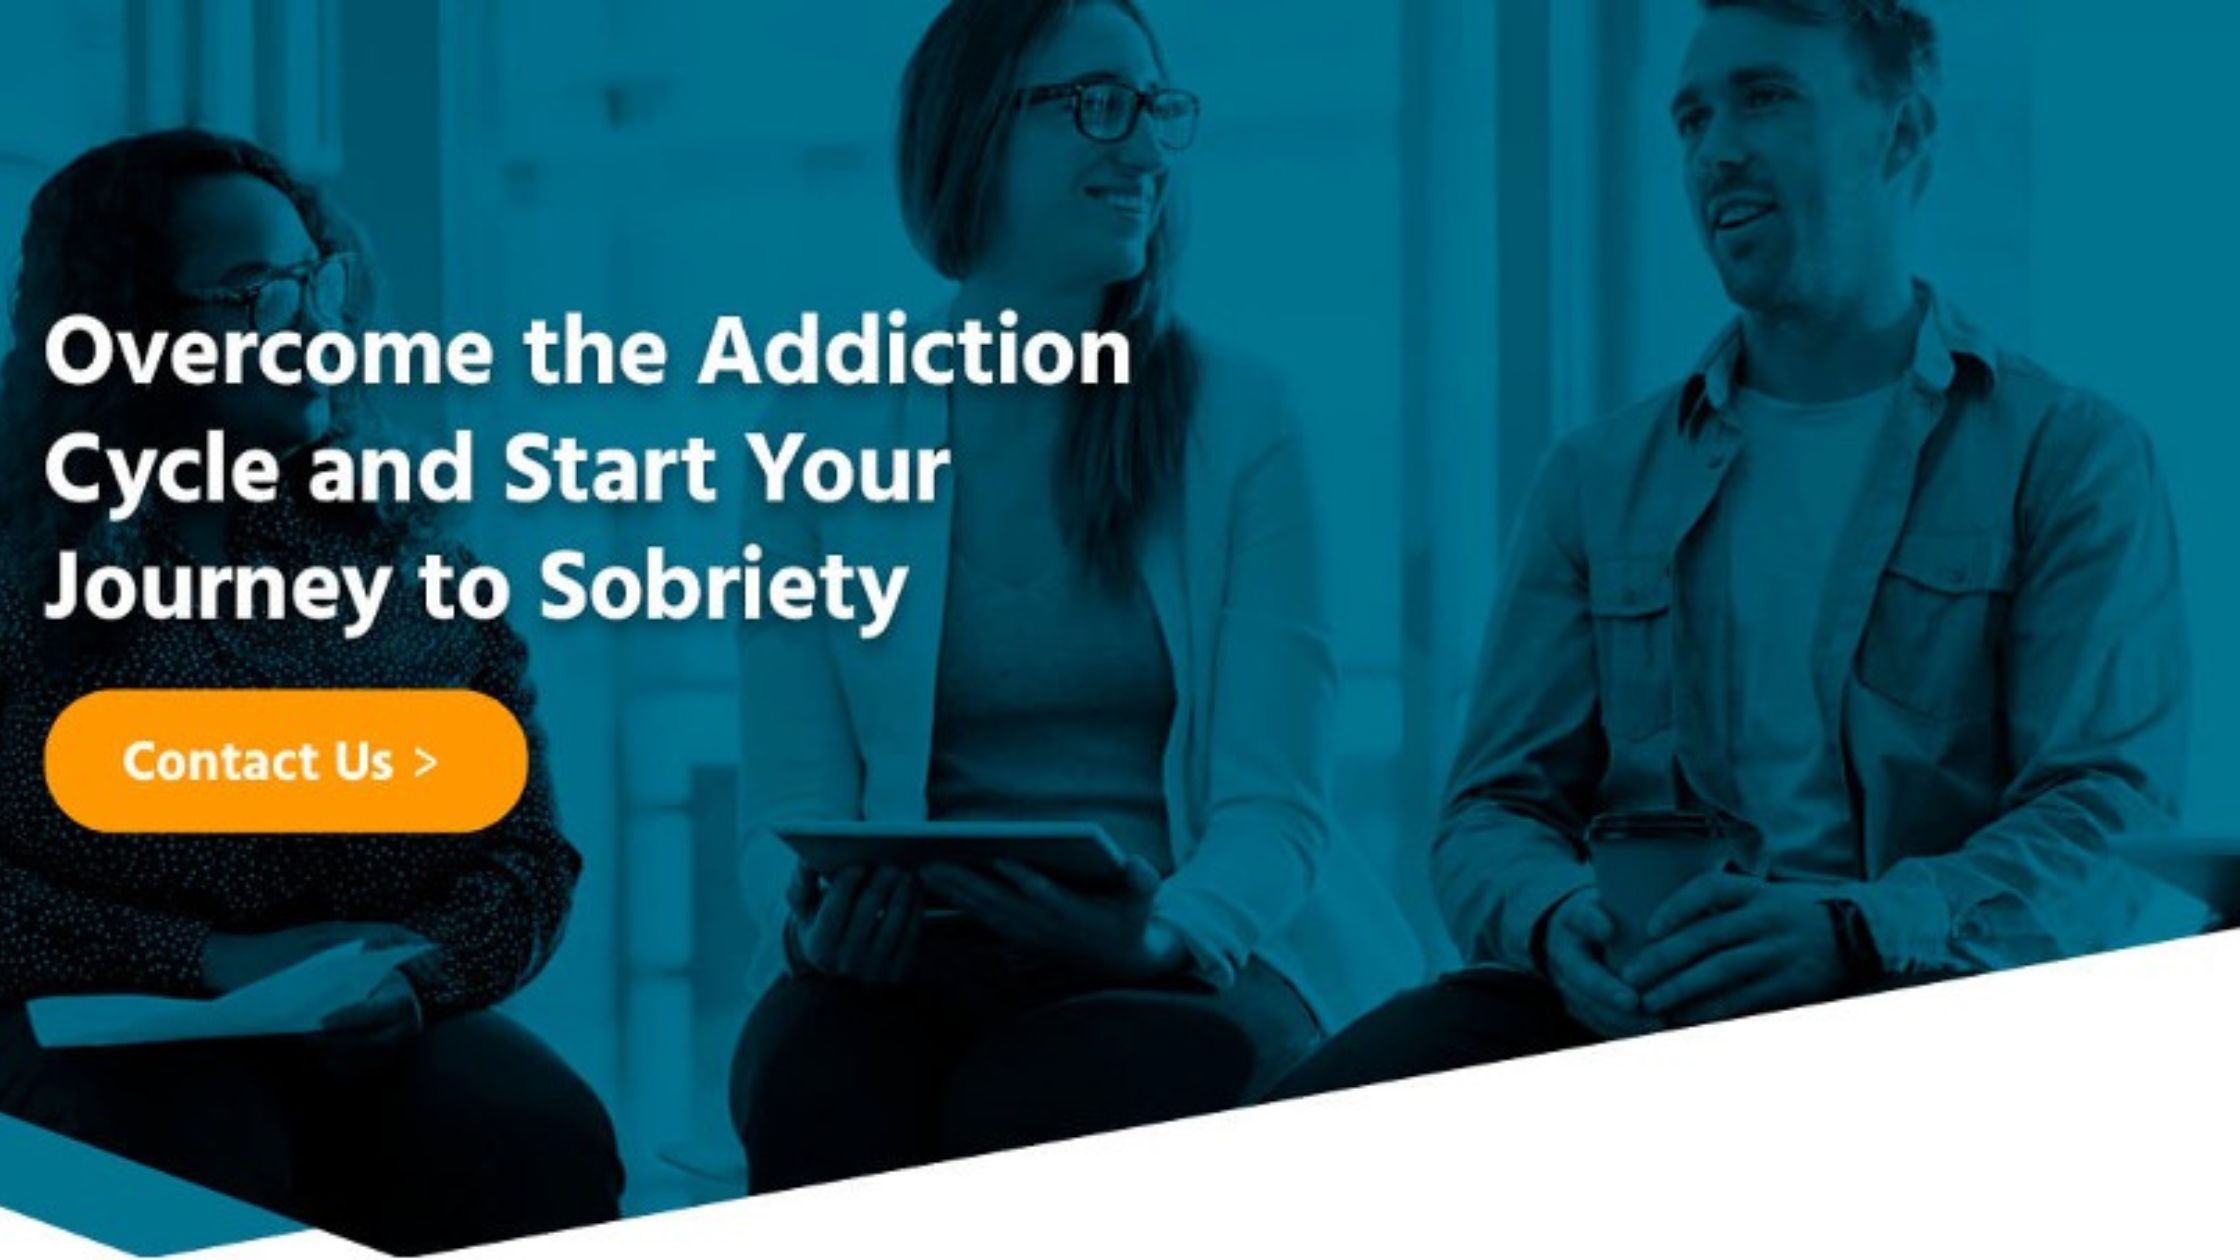 Start your journey to sobriety